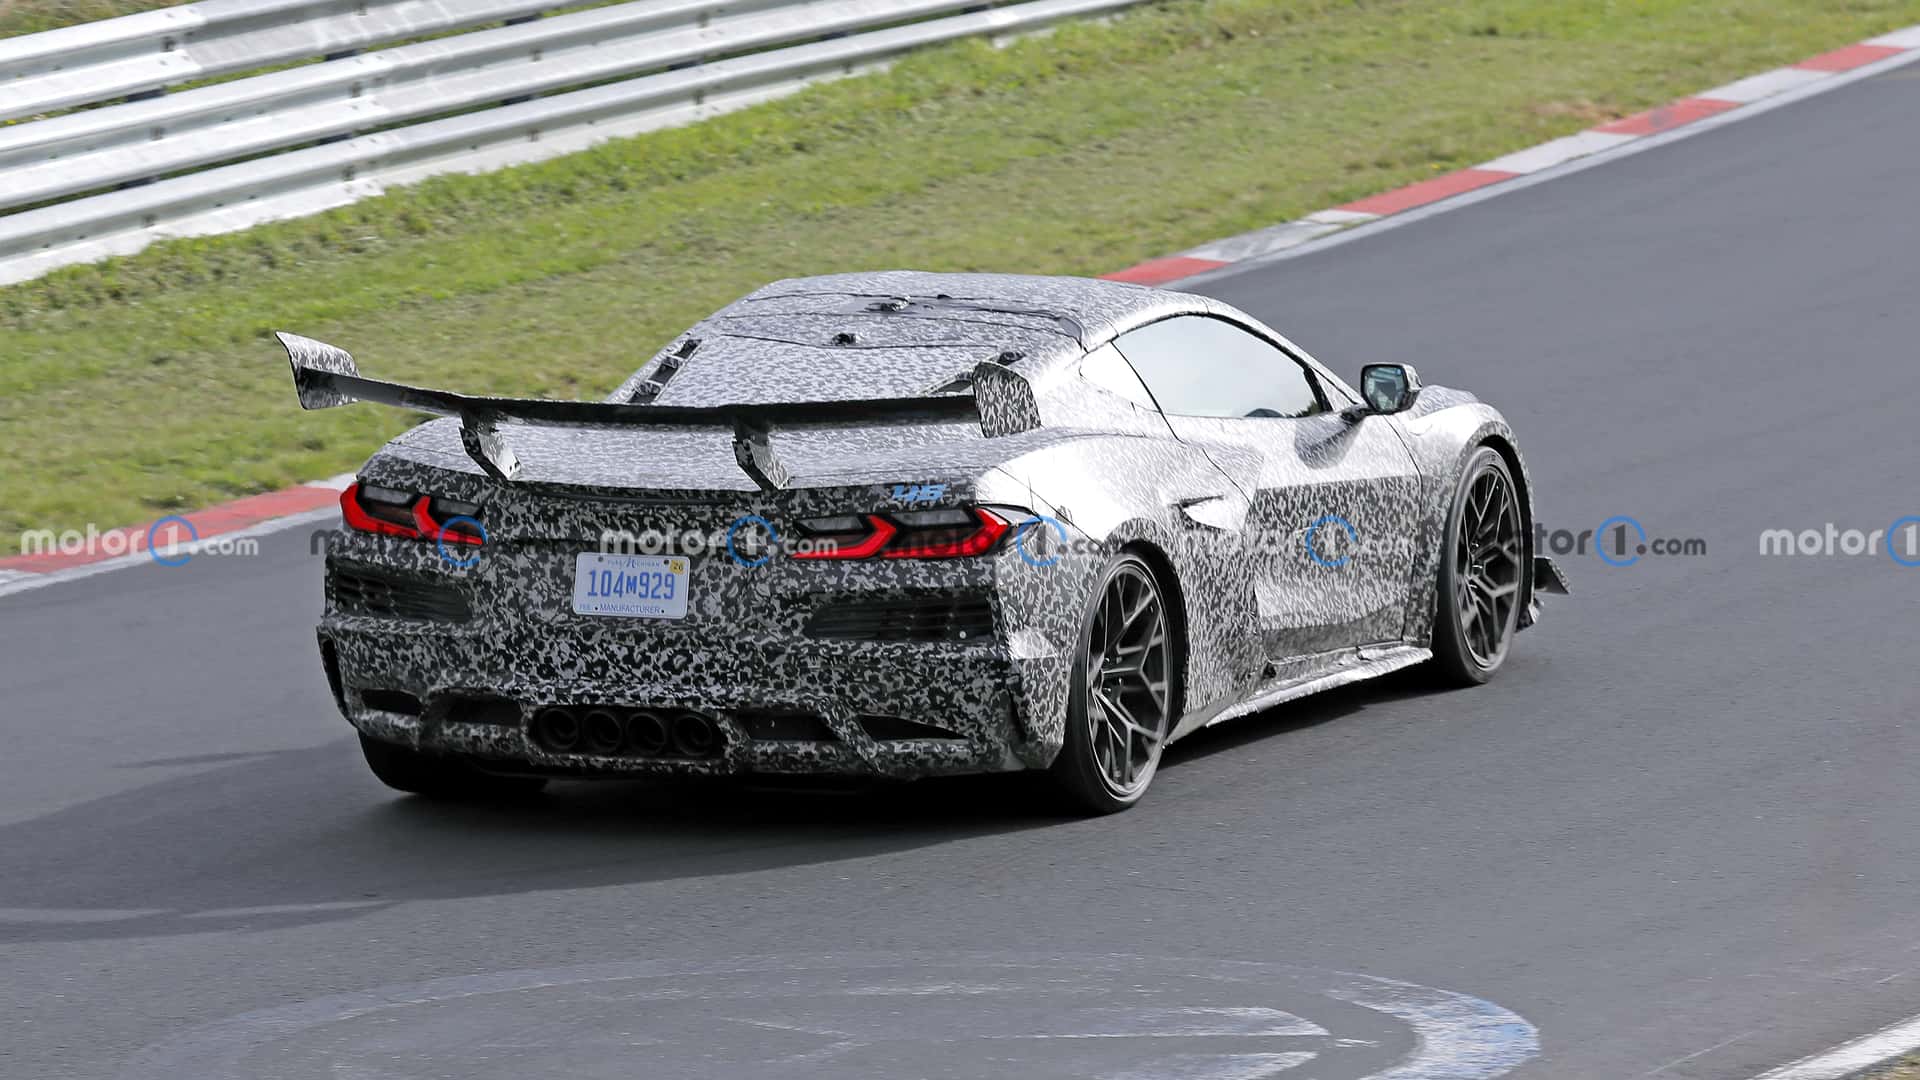 Rear view of the C8 Corvette ZR1 on the track